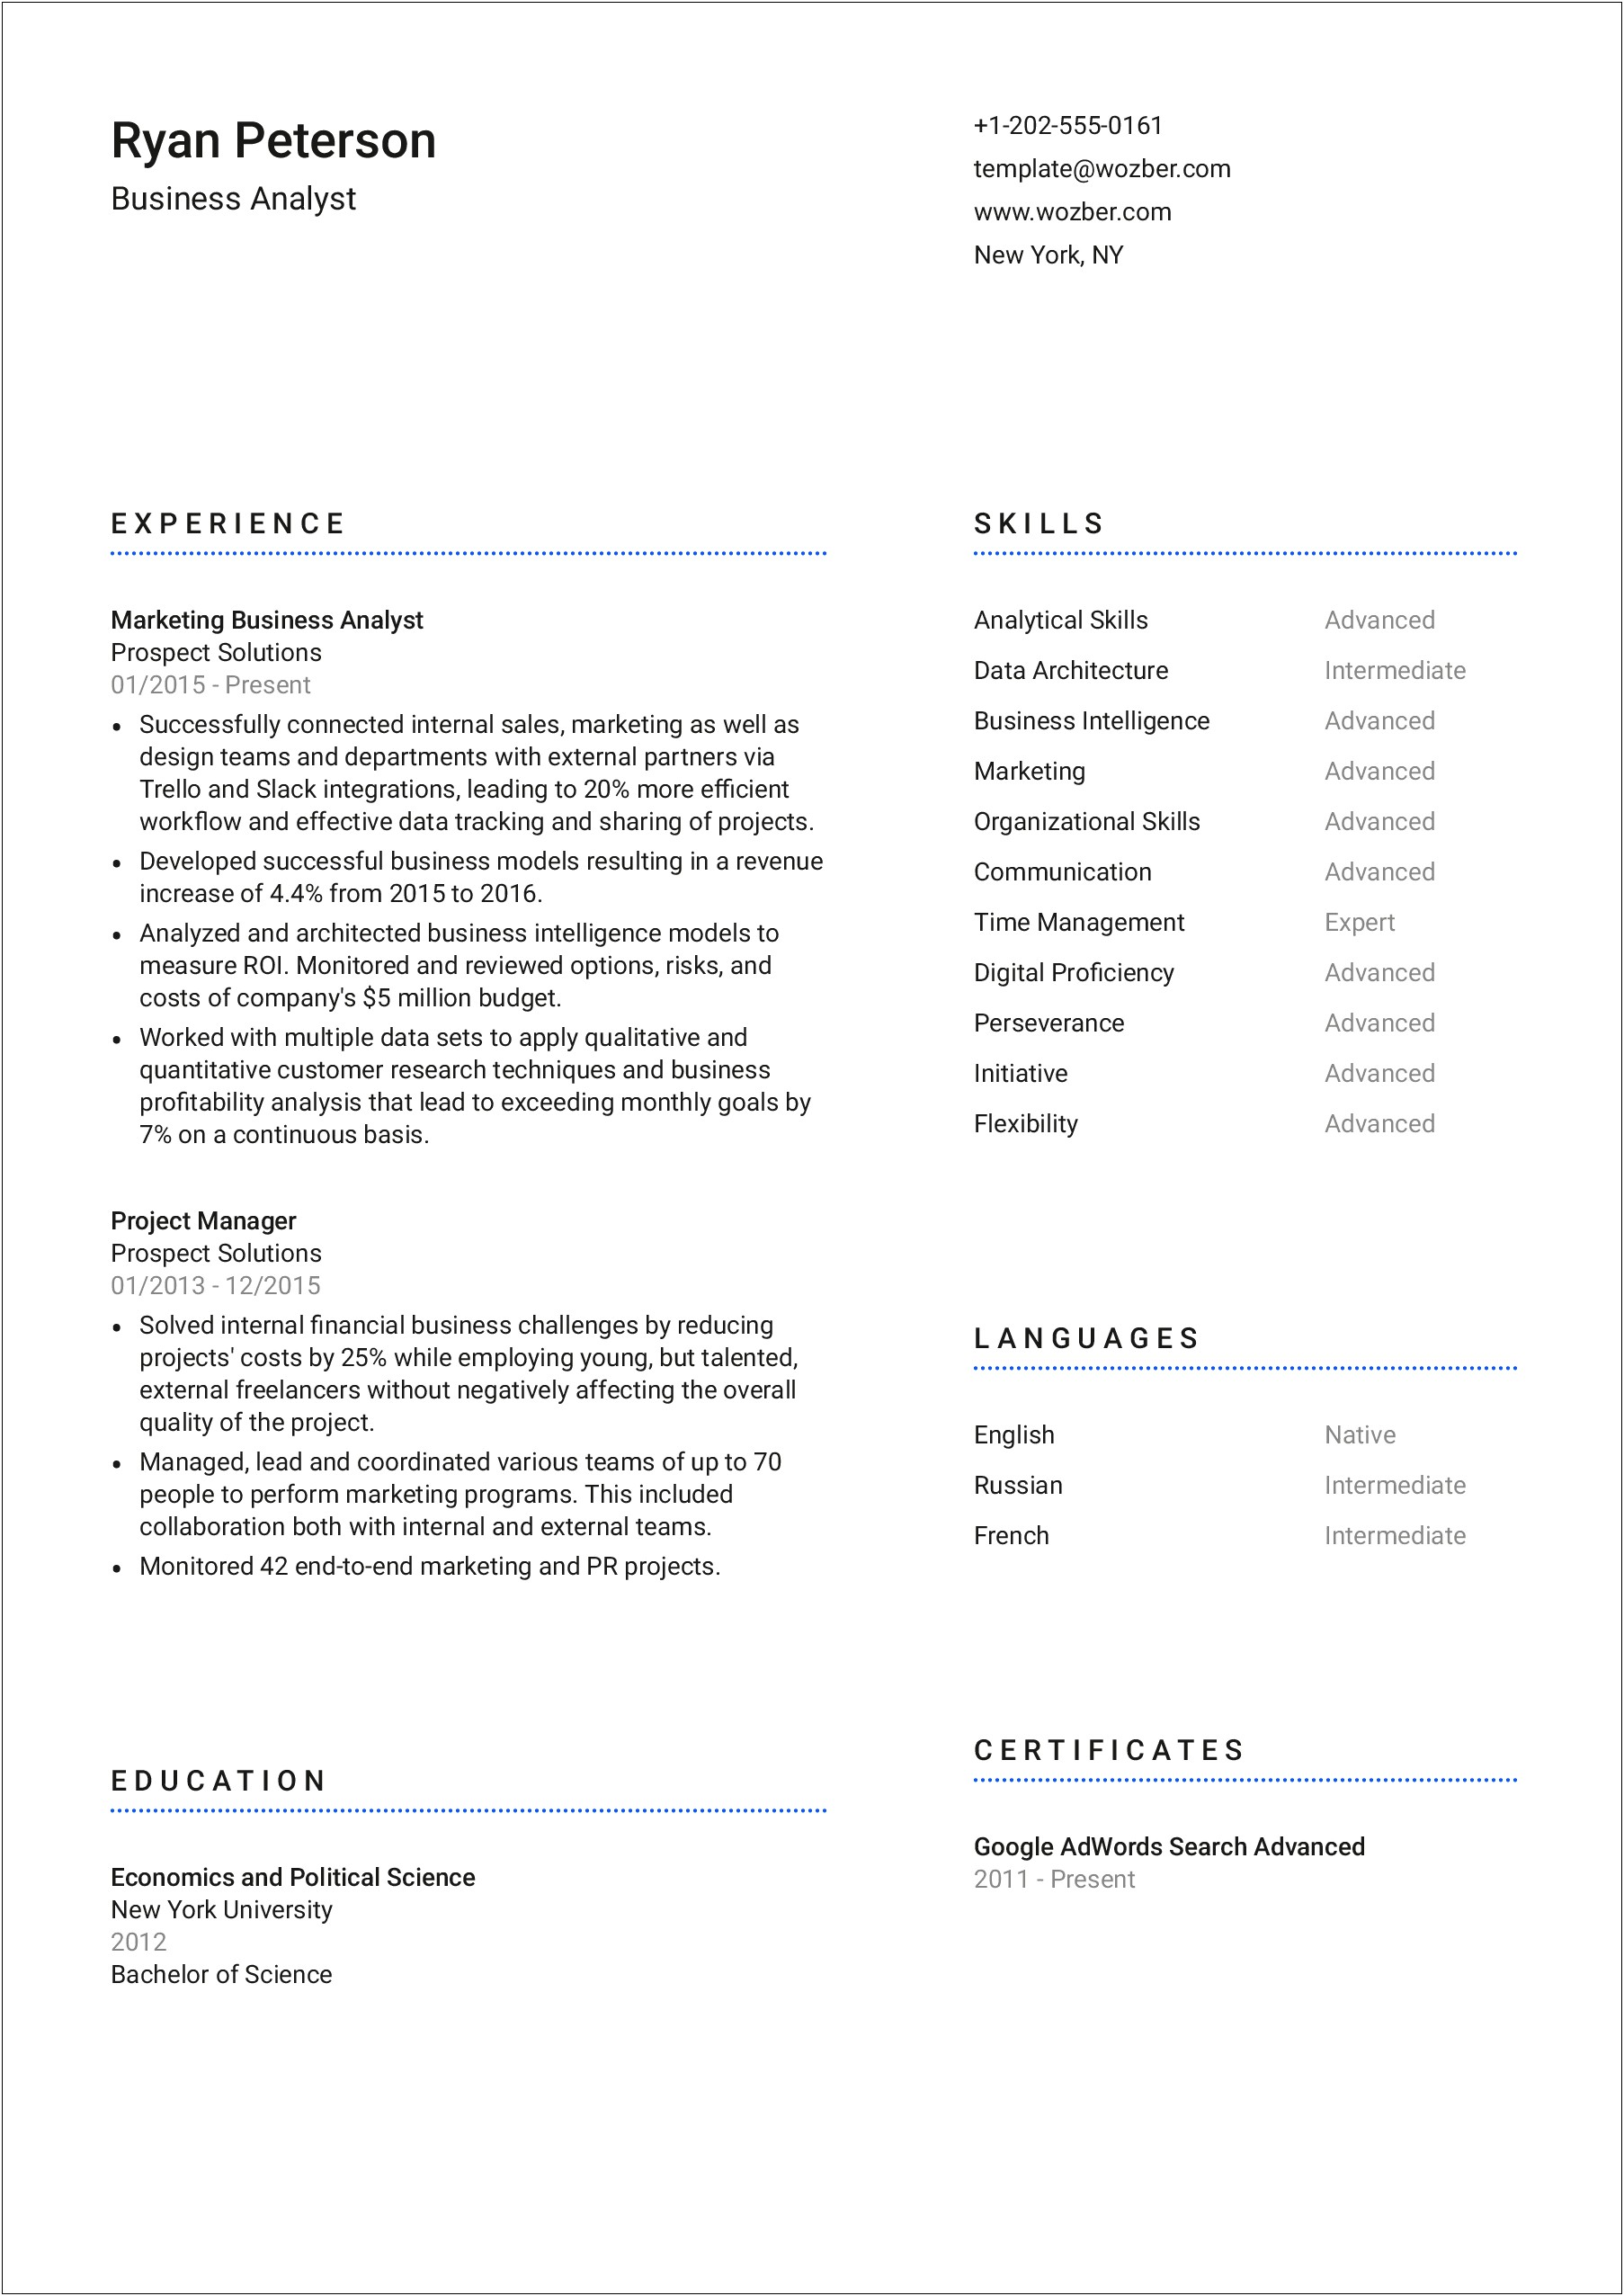 The Muse 275 Free Resume Templates